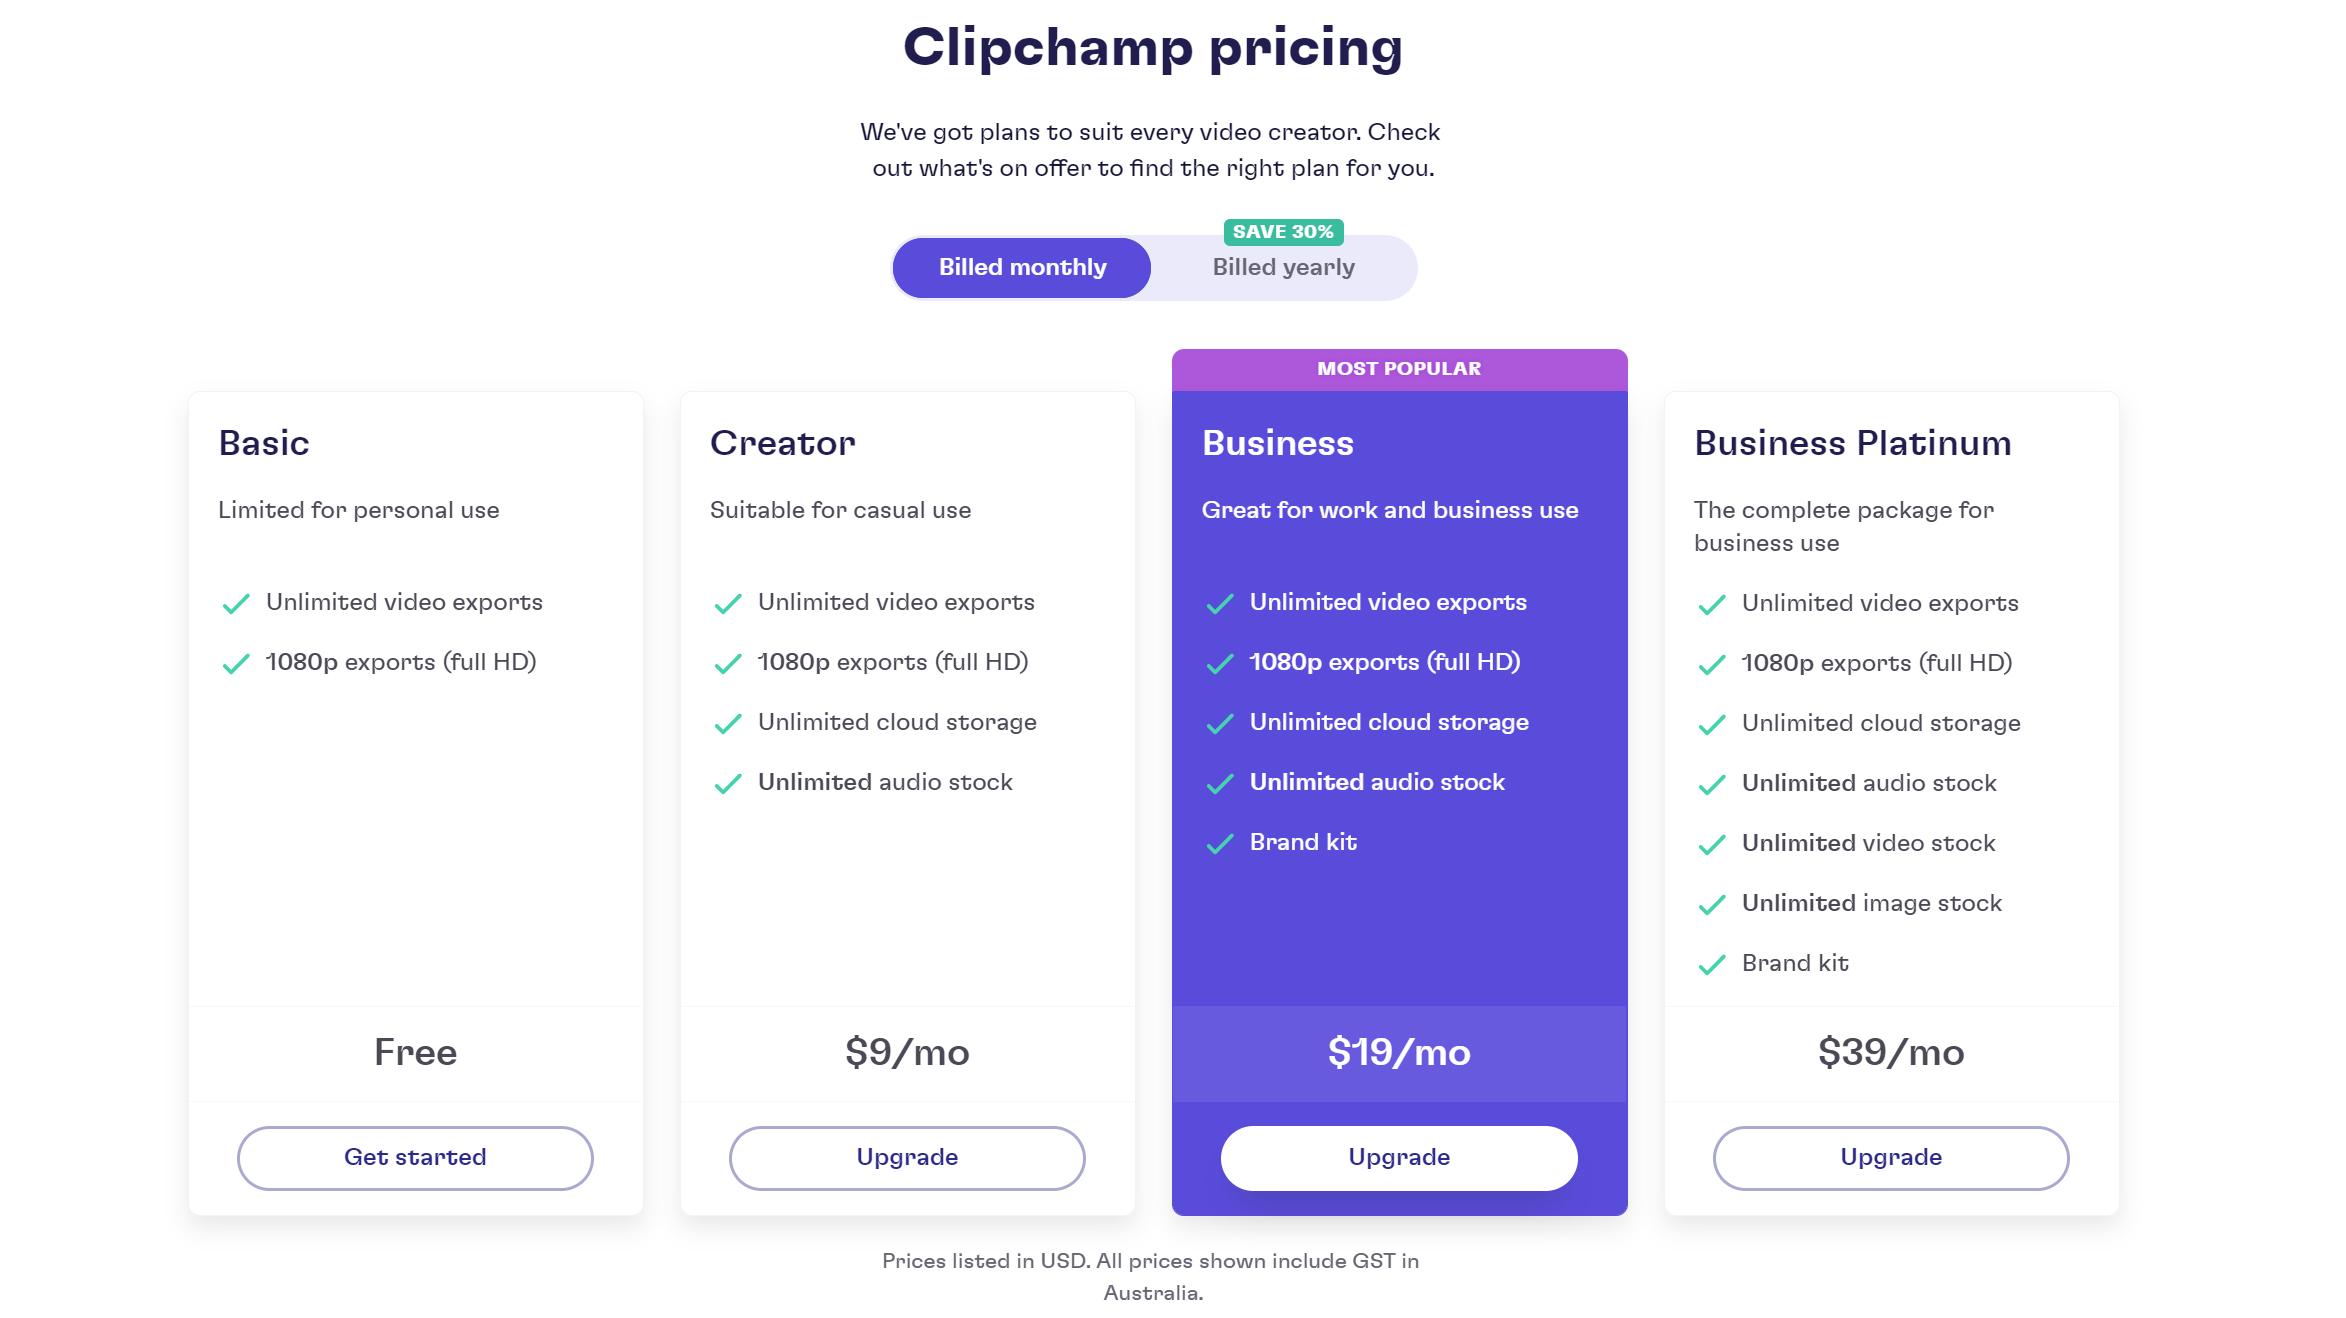 Clipchamp updated pricing March 2022